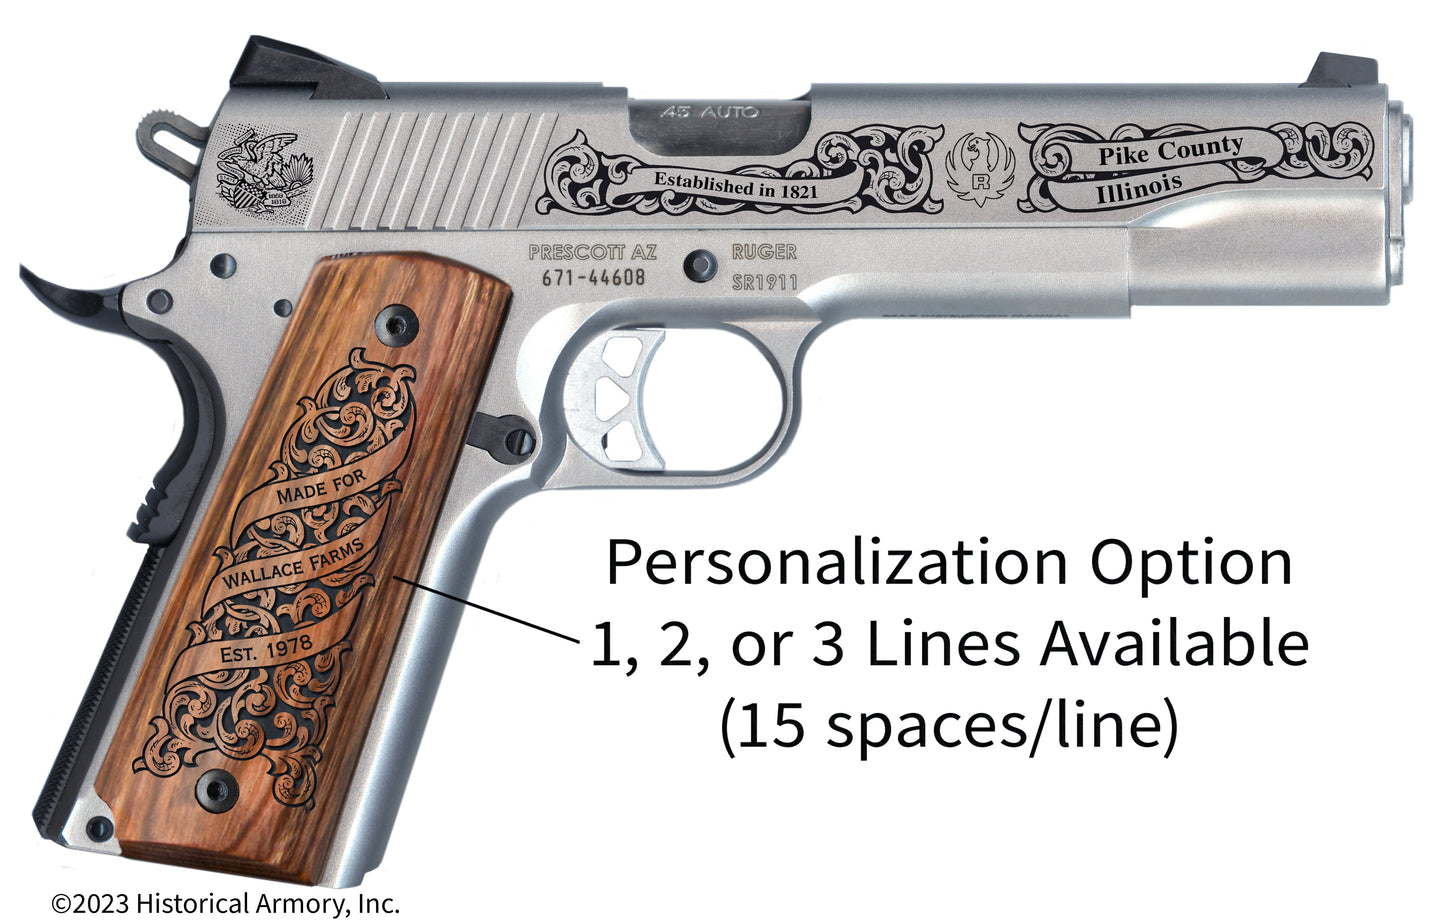 Pike County Illinois Personalized Engraved .45 Auto Ruger 1911